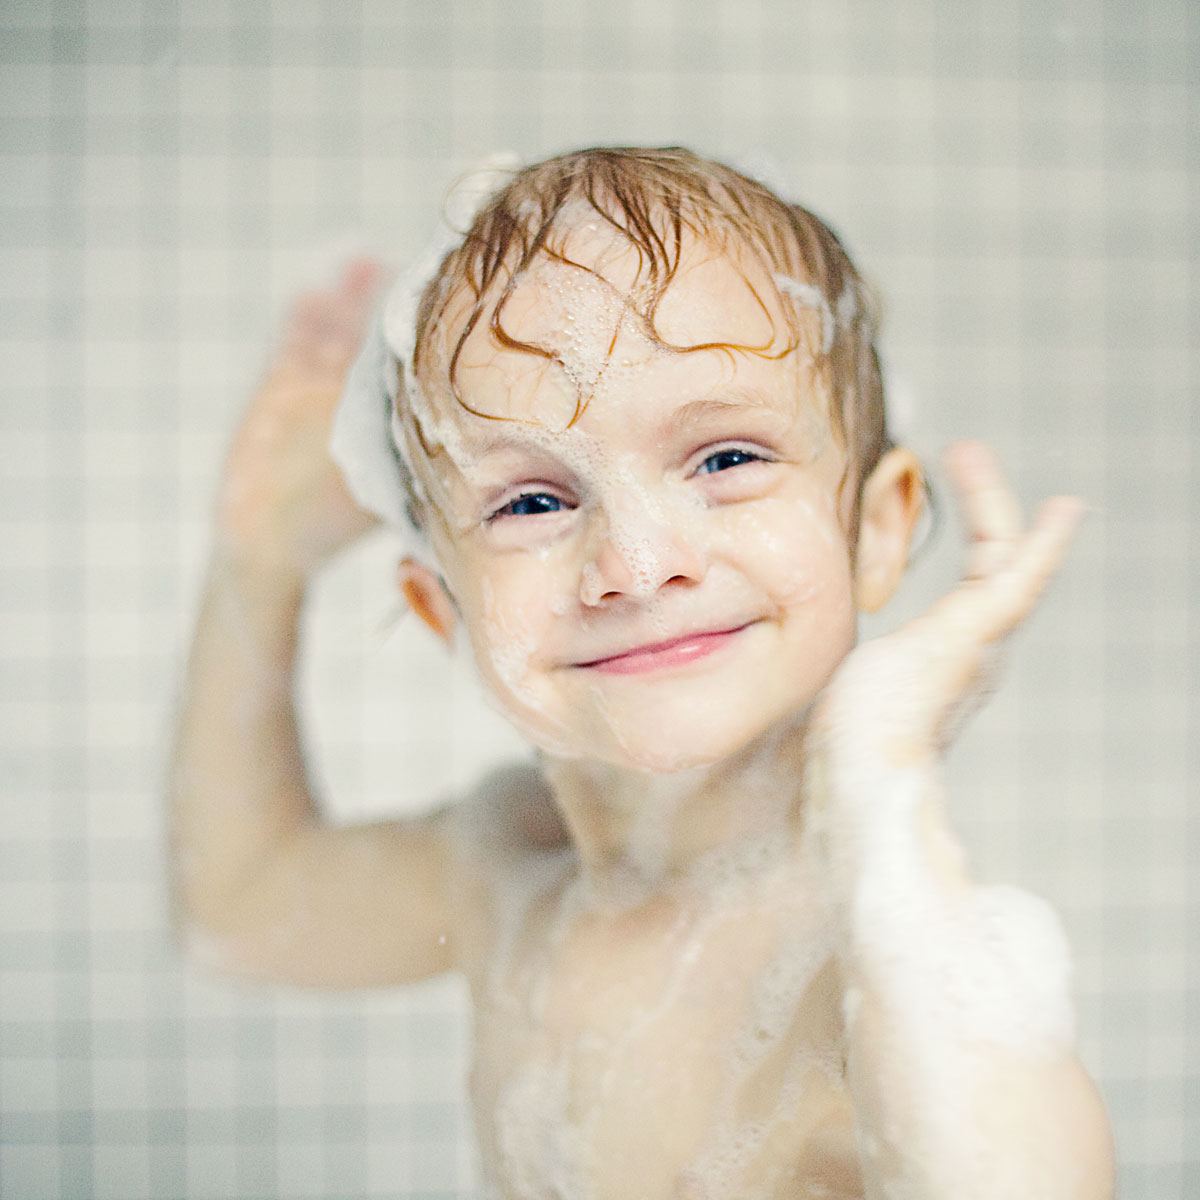 5 Things to Do When a Toddler Refuses Bath